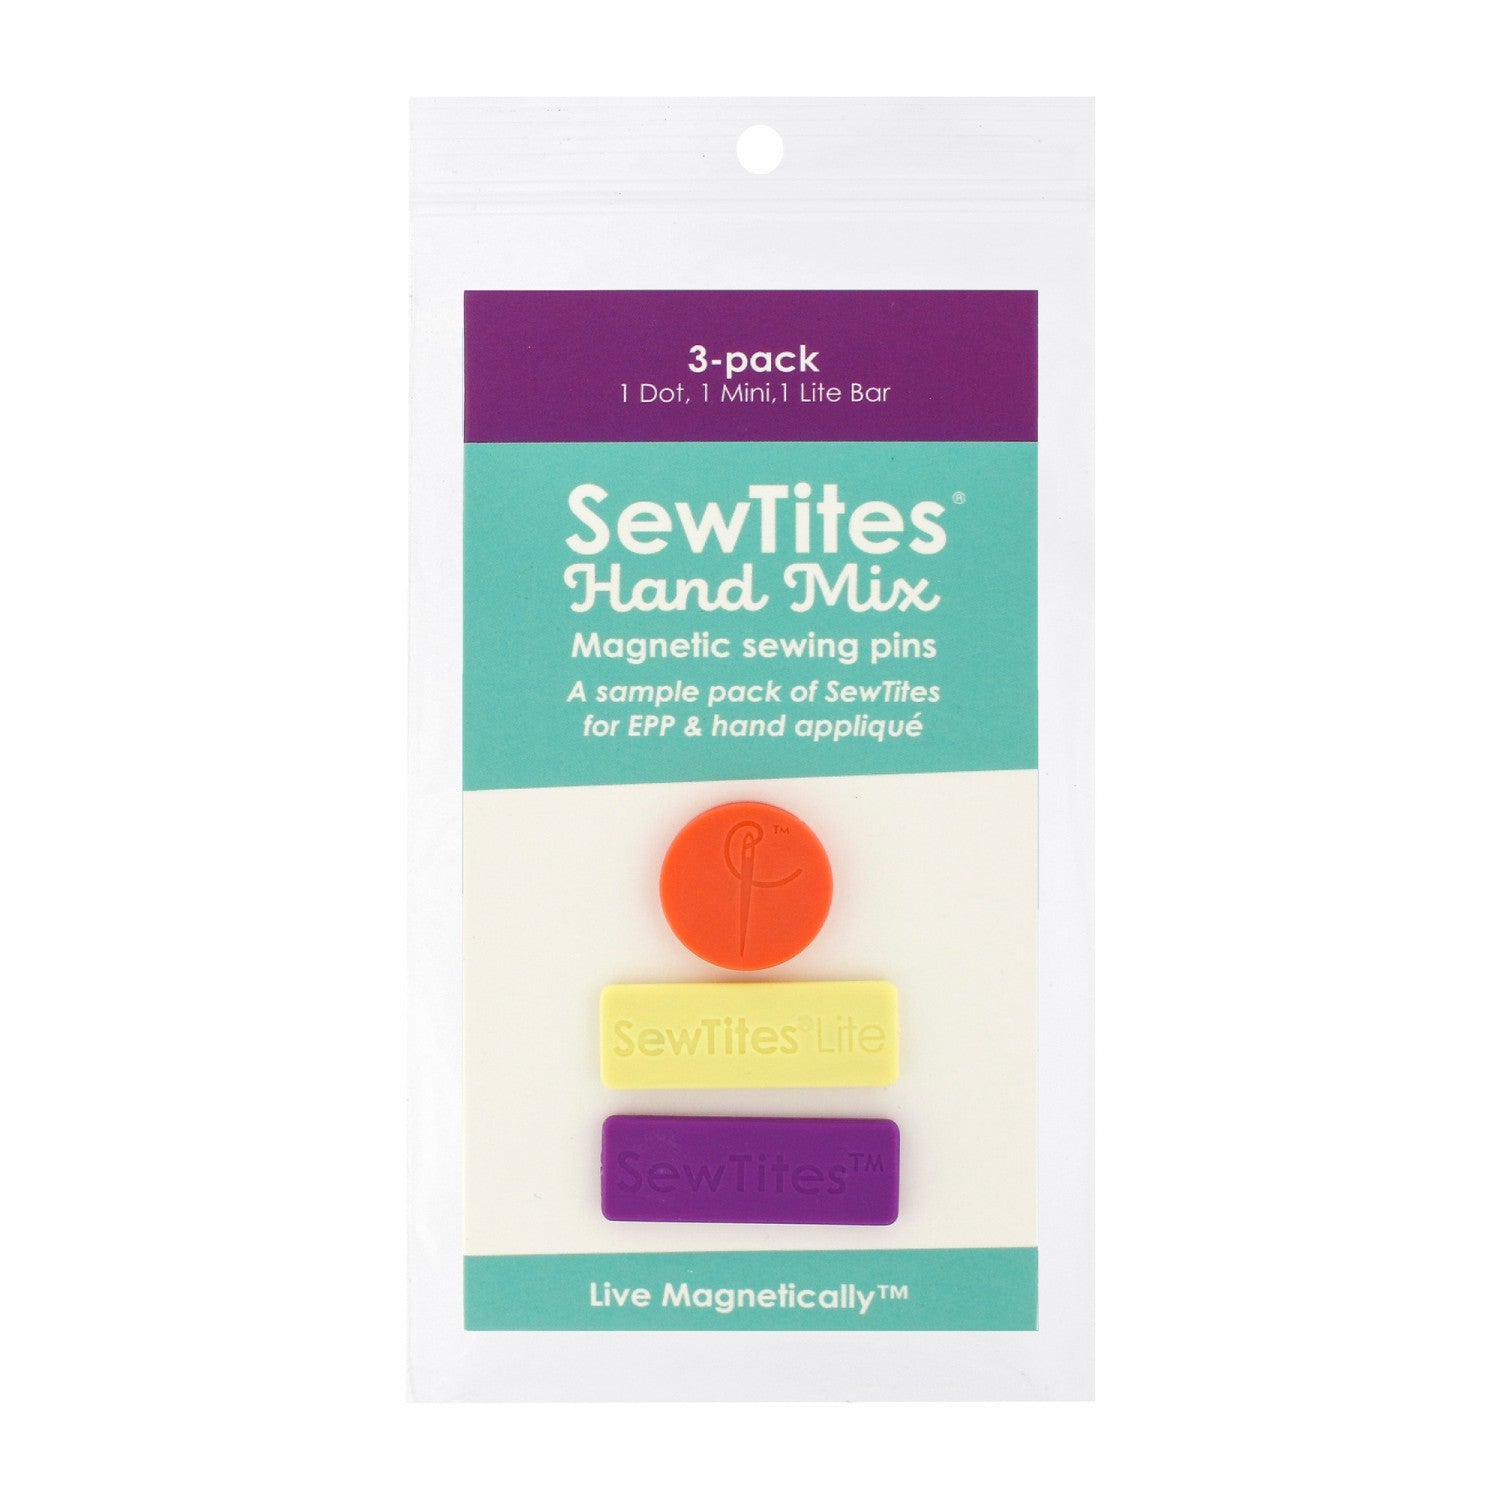 SewTites Hand Mix 3-Pack